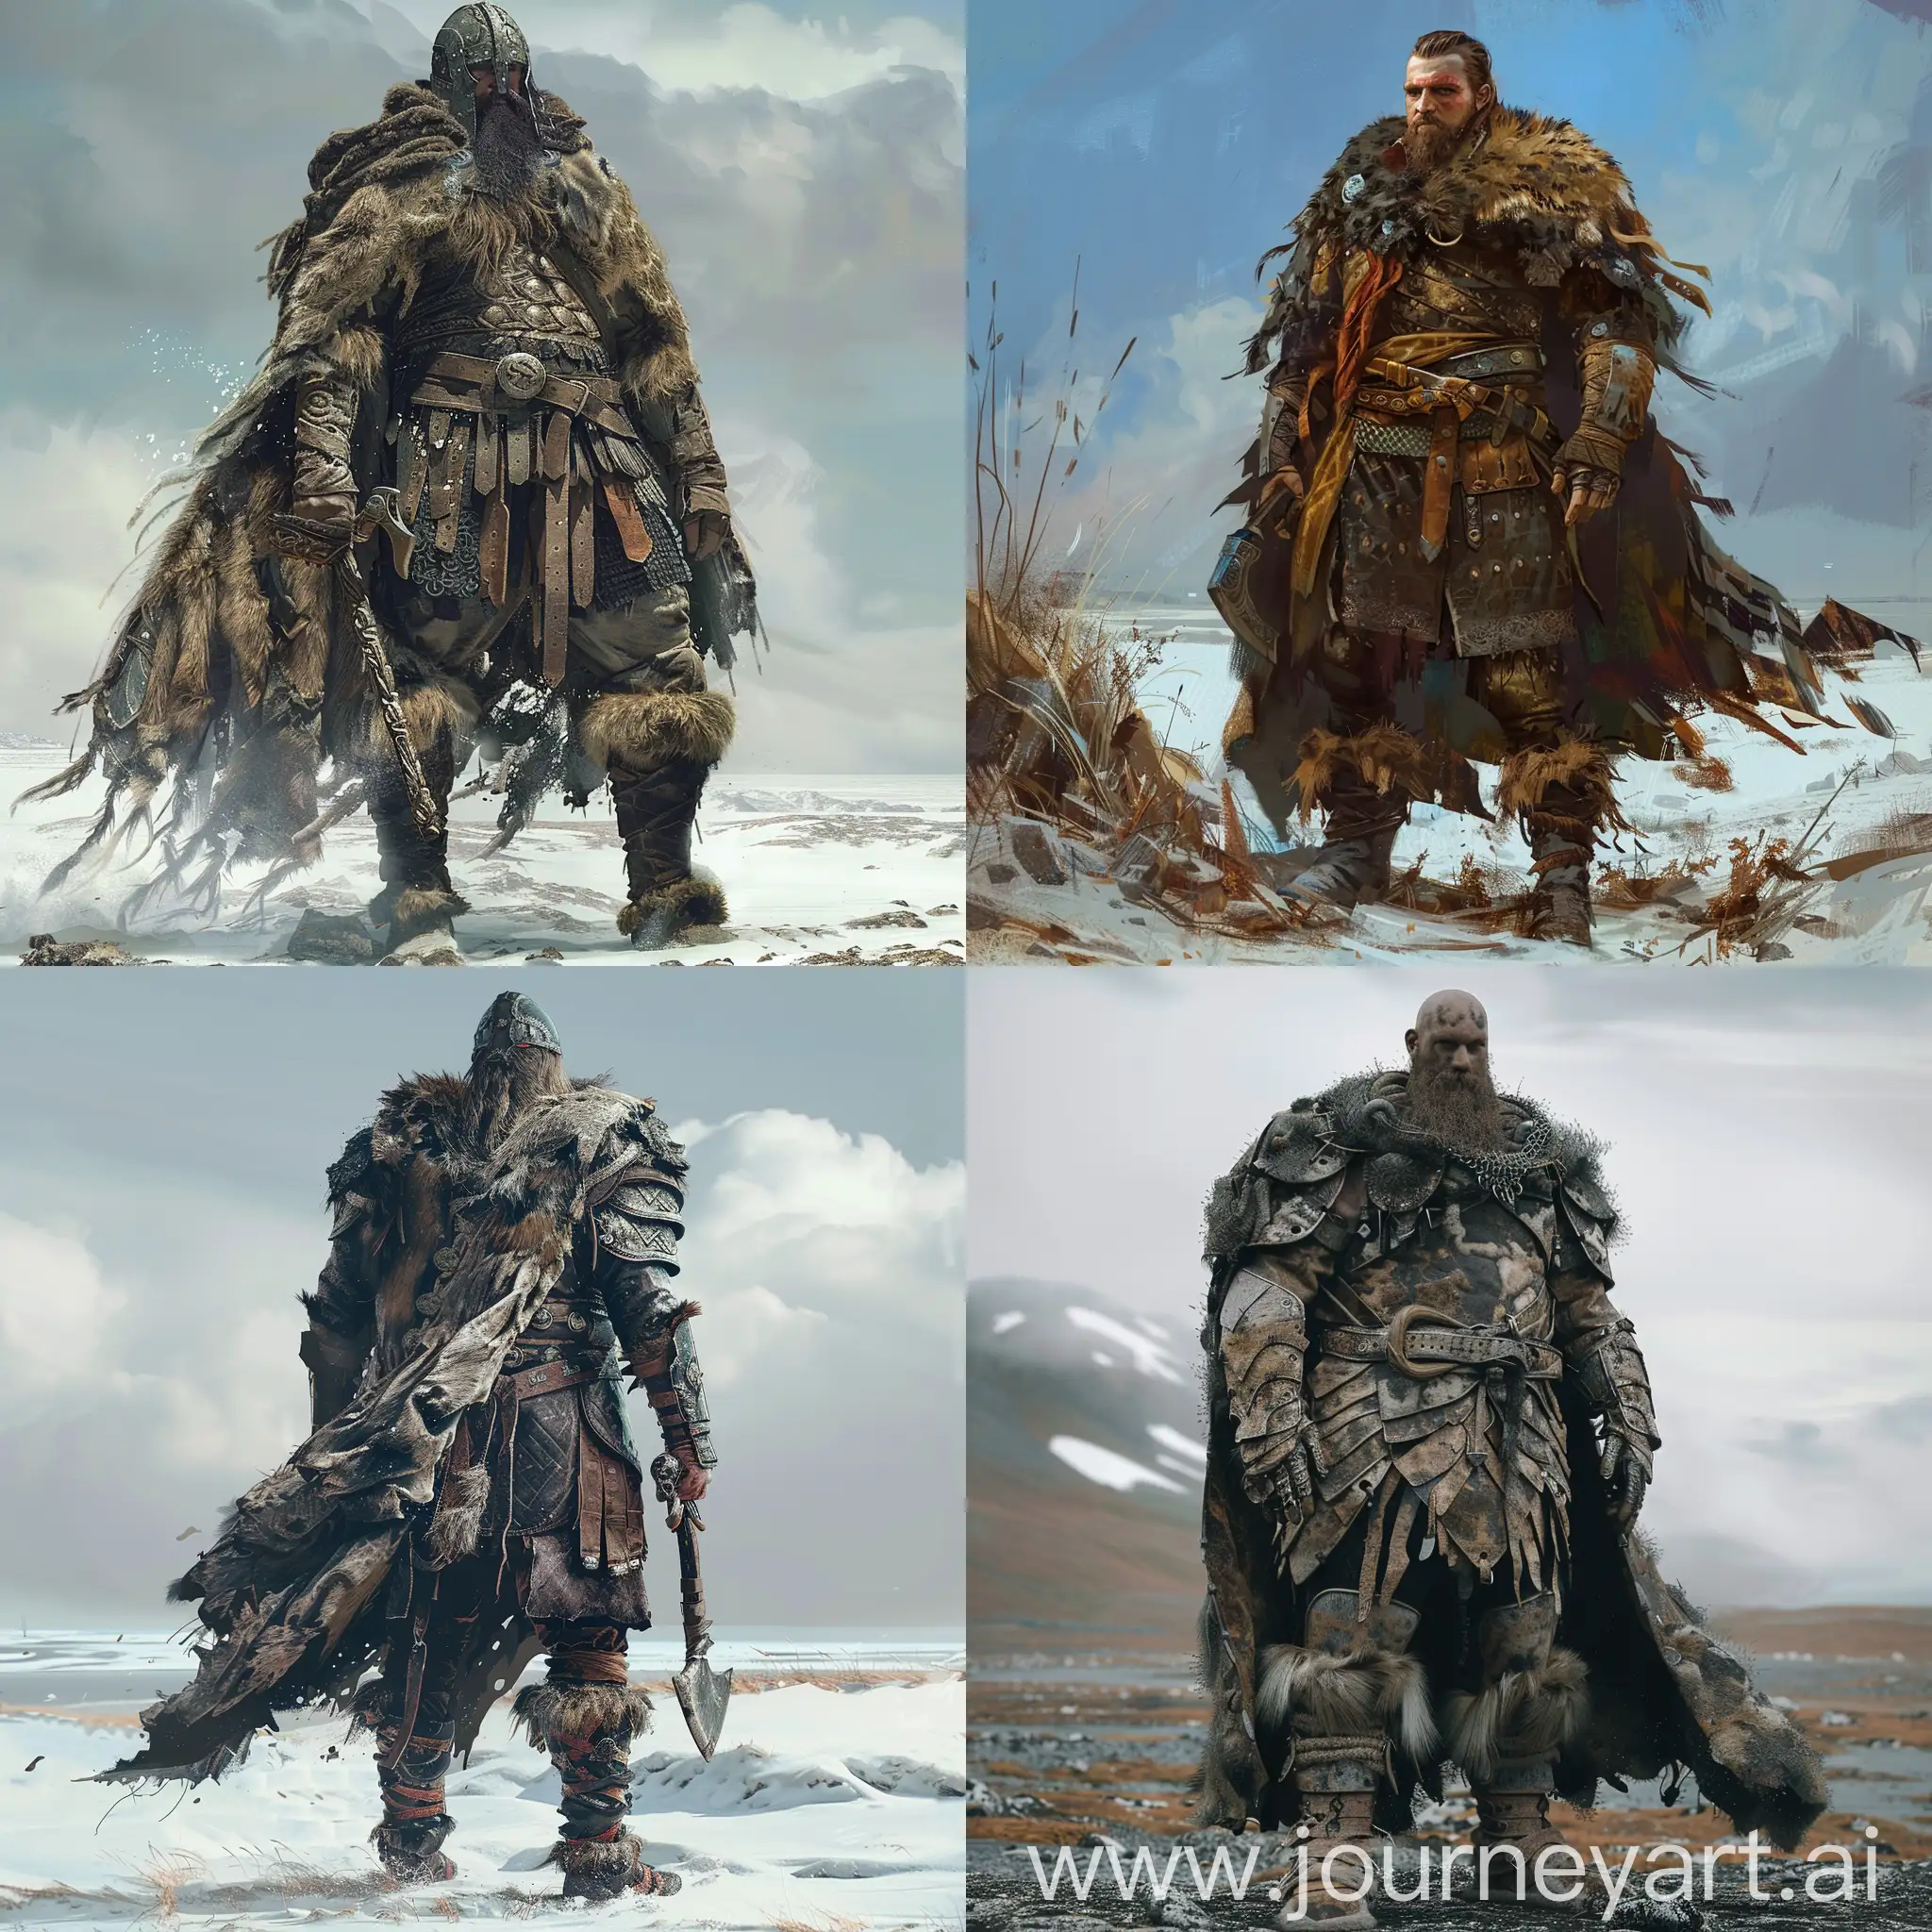 Viking Character standing in a tundra, clad in leather armor and a heavy cloak made of pelts